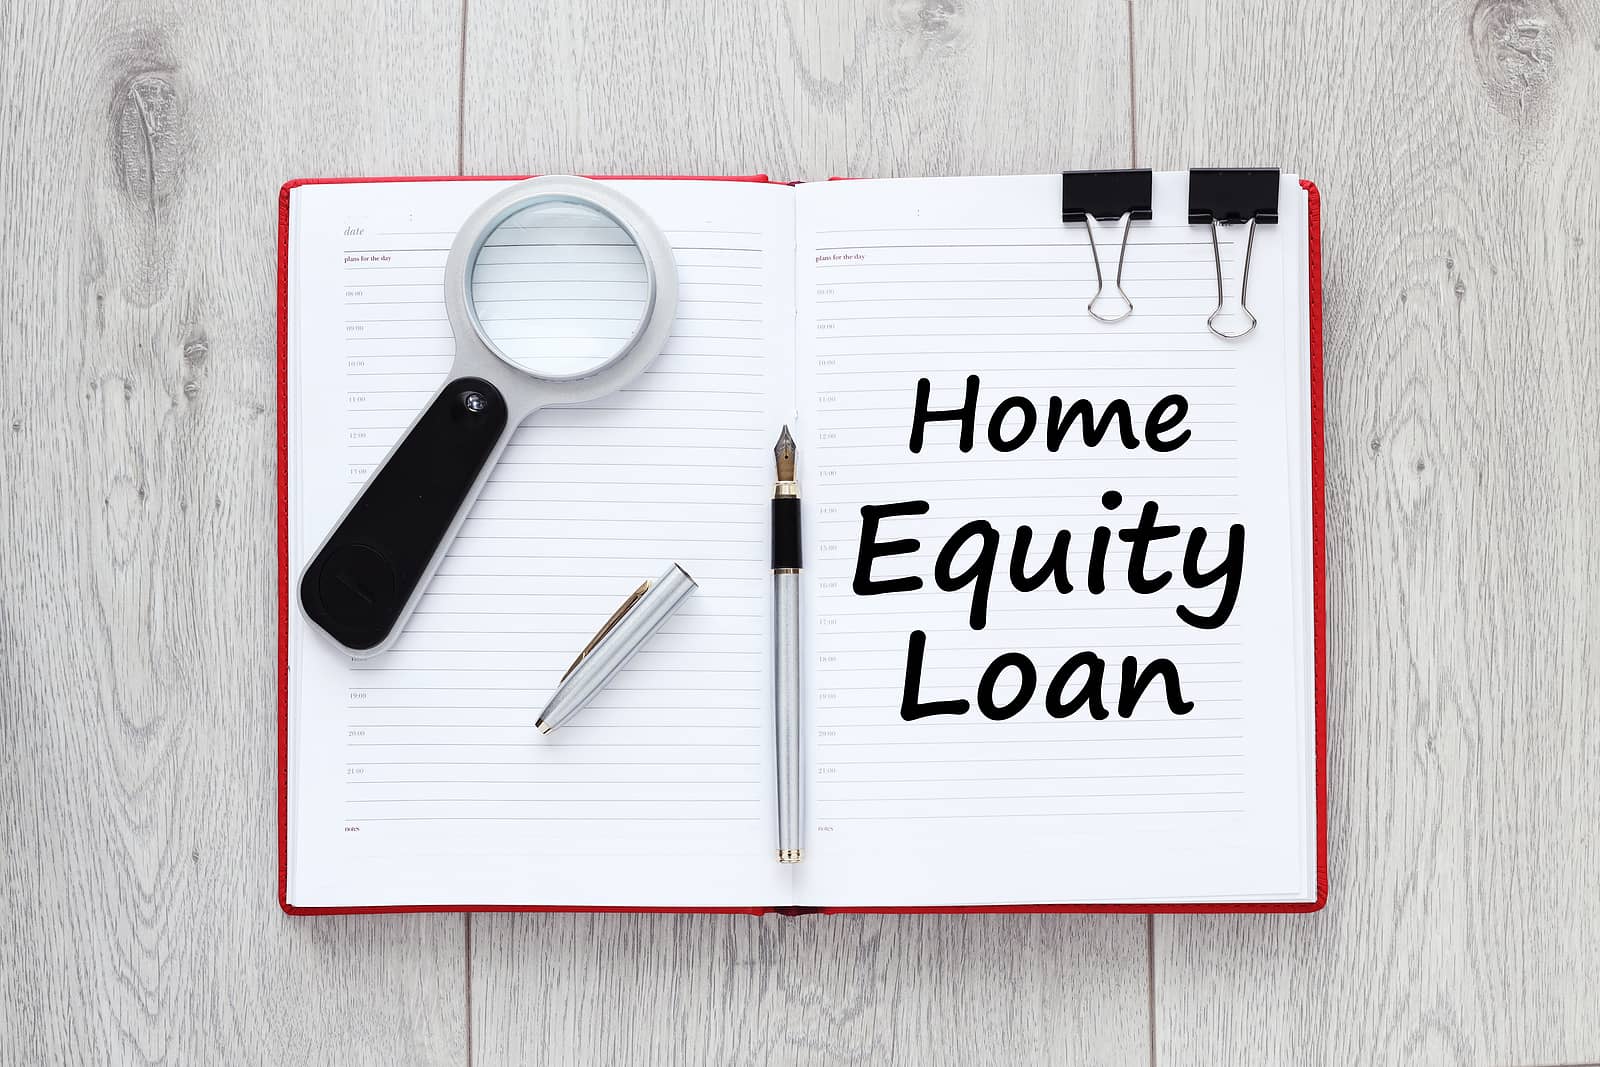 How Are Home Equity Loans Structured?